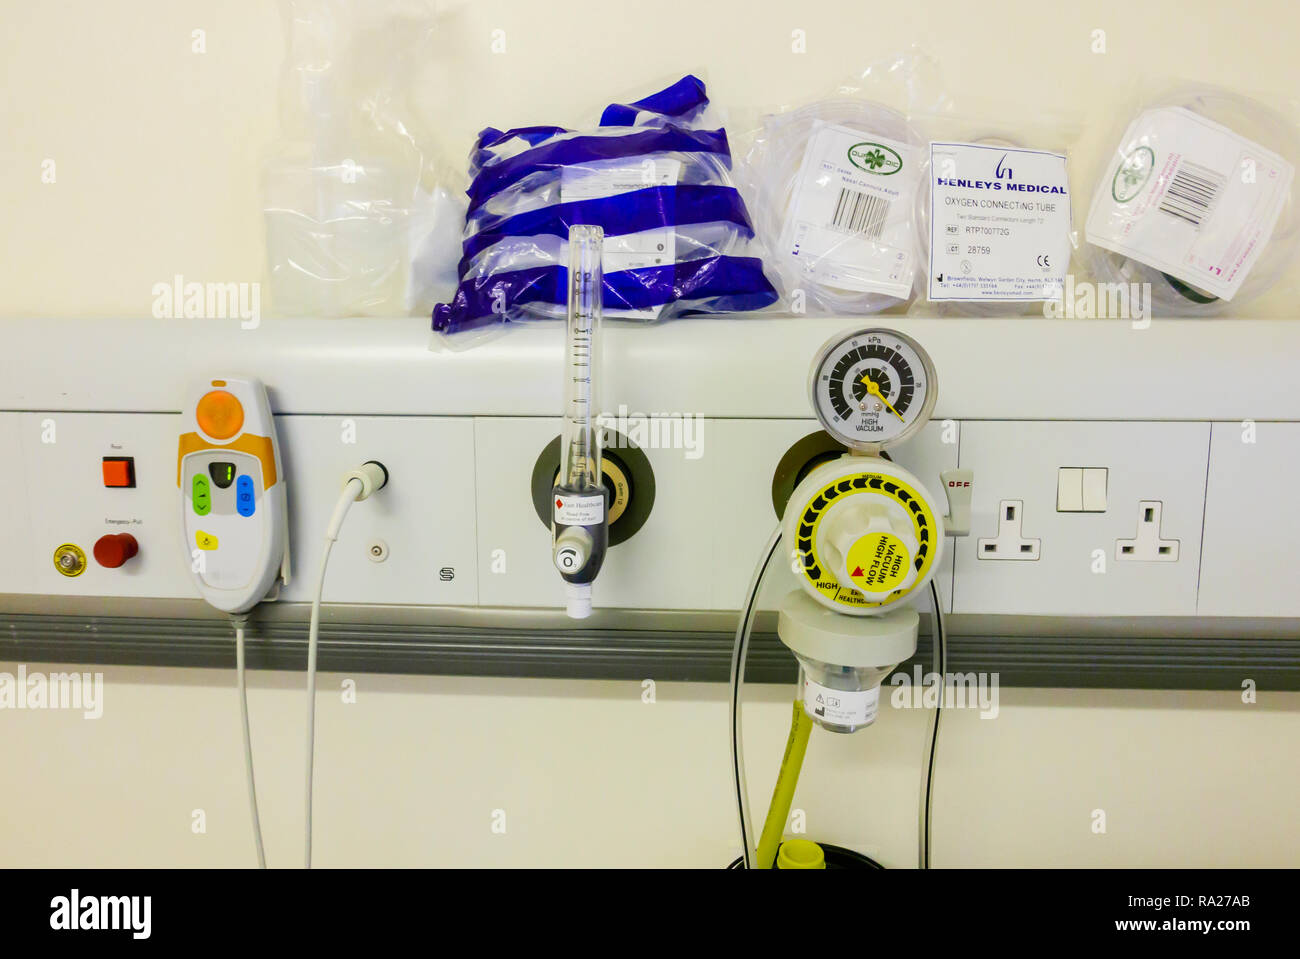 Bed head unit in a hospital ward showing a suction vacuum pressure gauge, an oxygen supply and a nurses call bell. Stock Photo